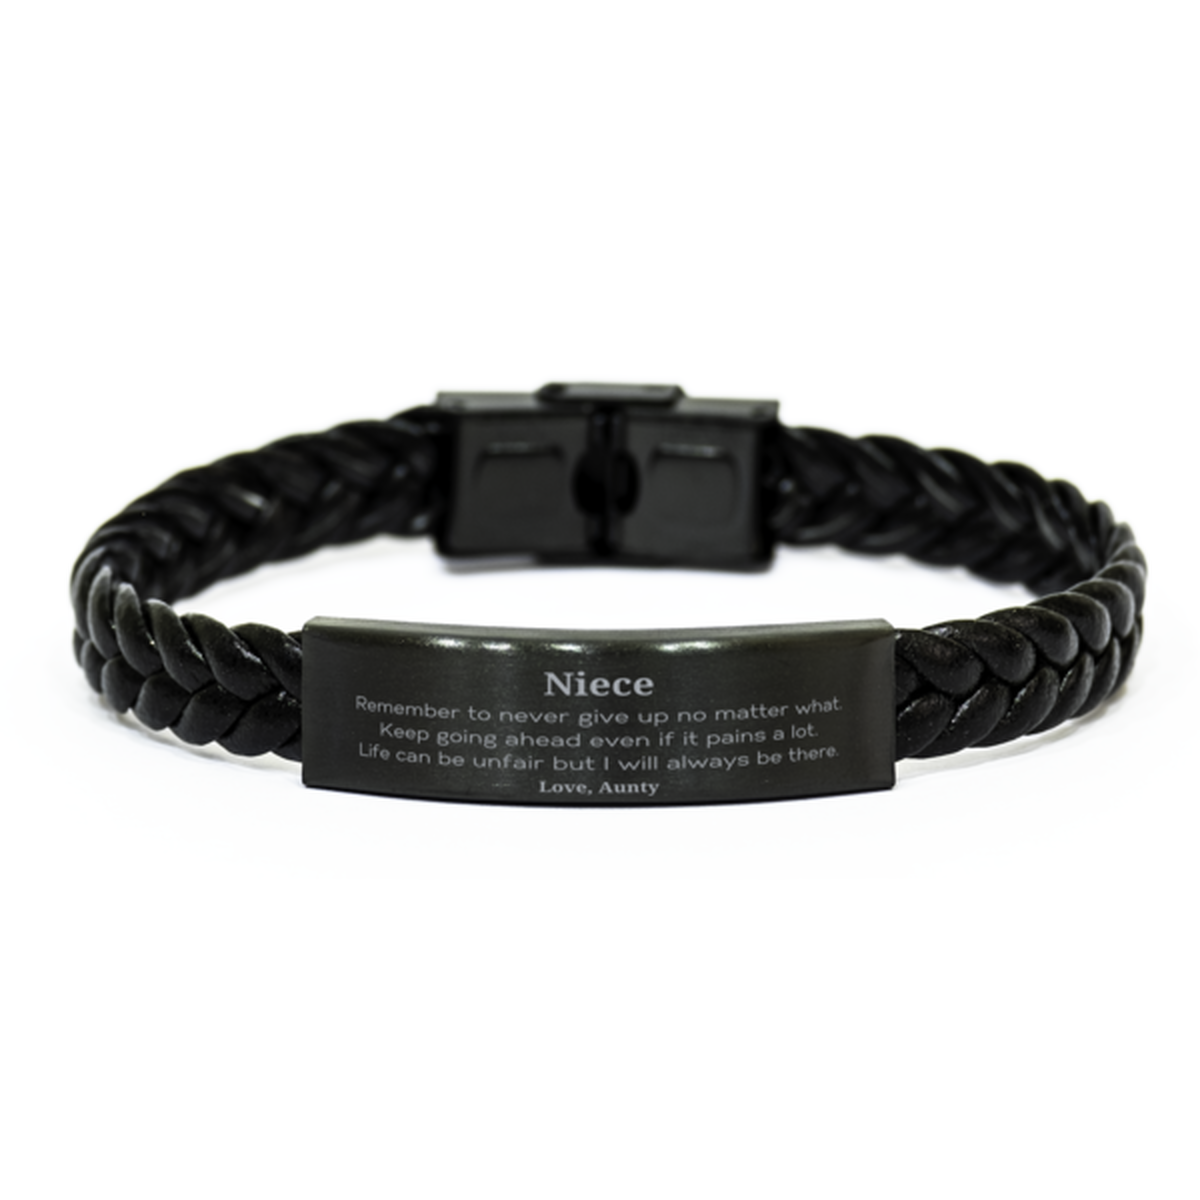 Niece Motivational Gifts from Aunty, Remember to never give up no matter what, Inspirational Birthday Braided Leather Bracelet for Niece